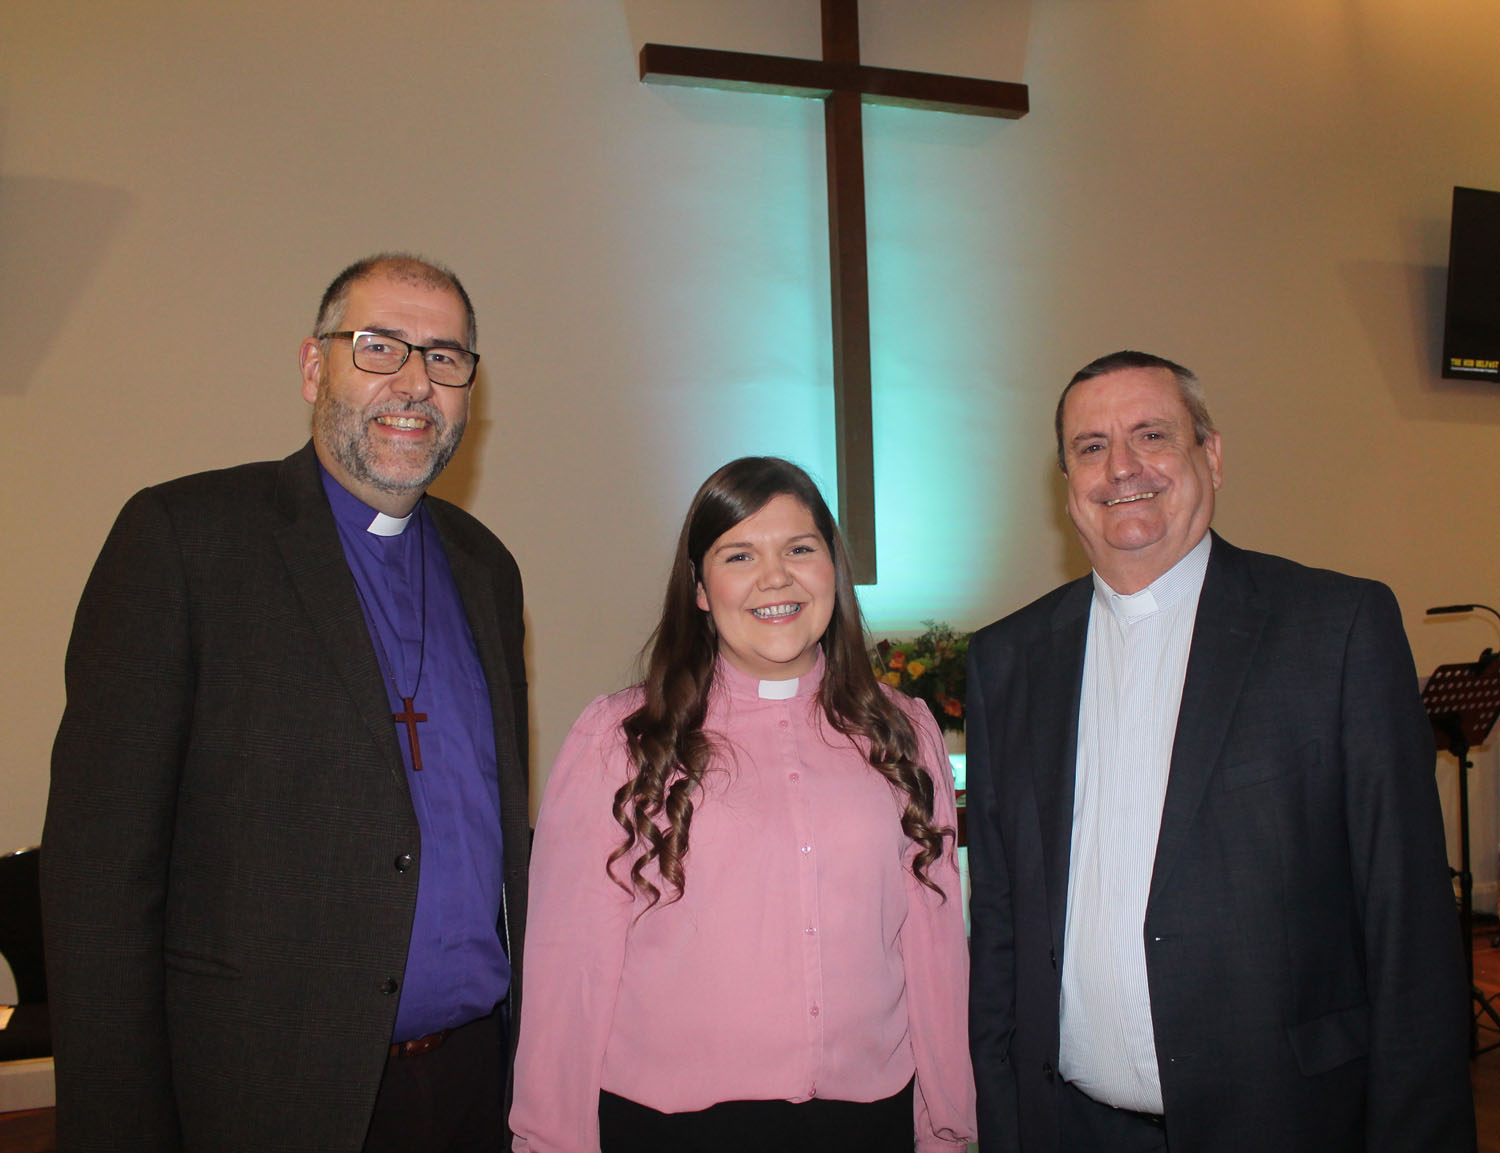 The Rev Danielle McCullagh at the Service of Introduction with the Bishop of Connor, the Rt Rev George Davison, left, and the Rev Philip Agnew, North Eastern District Superintendent, Methodist Church.